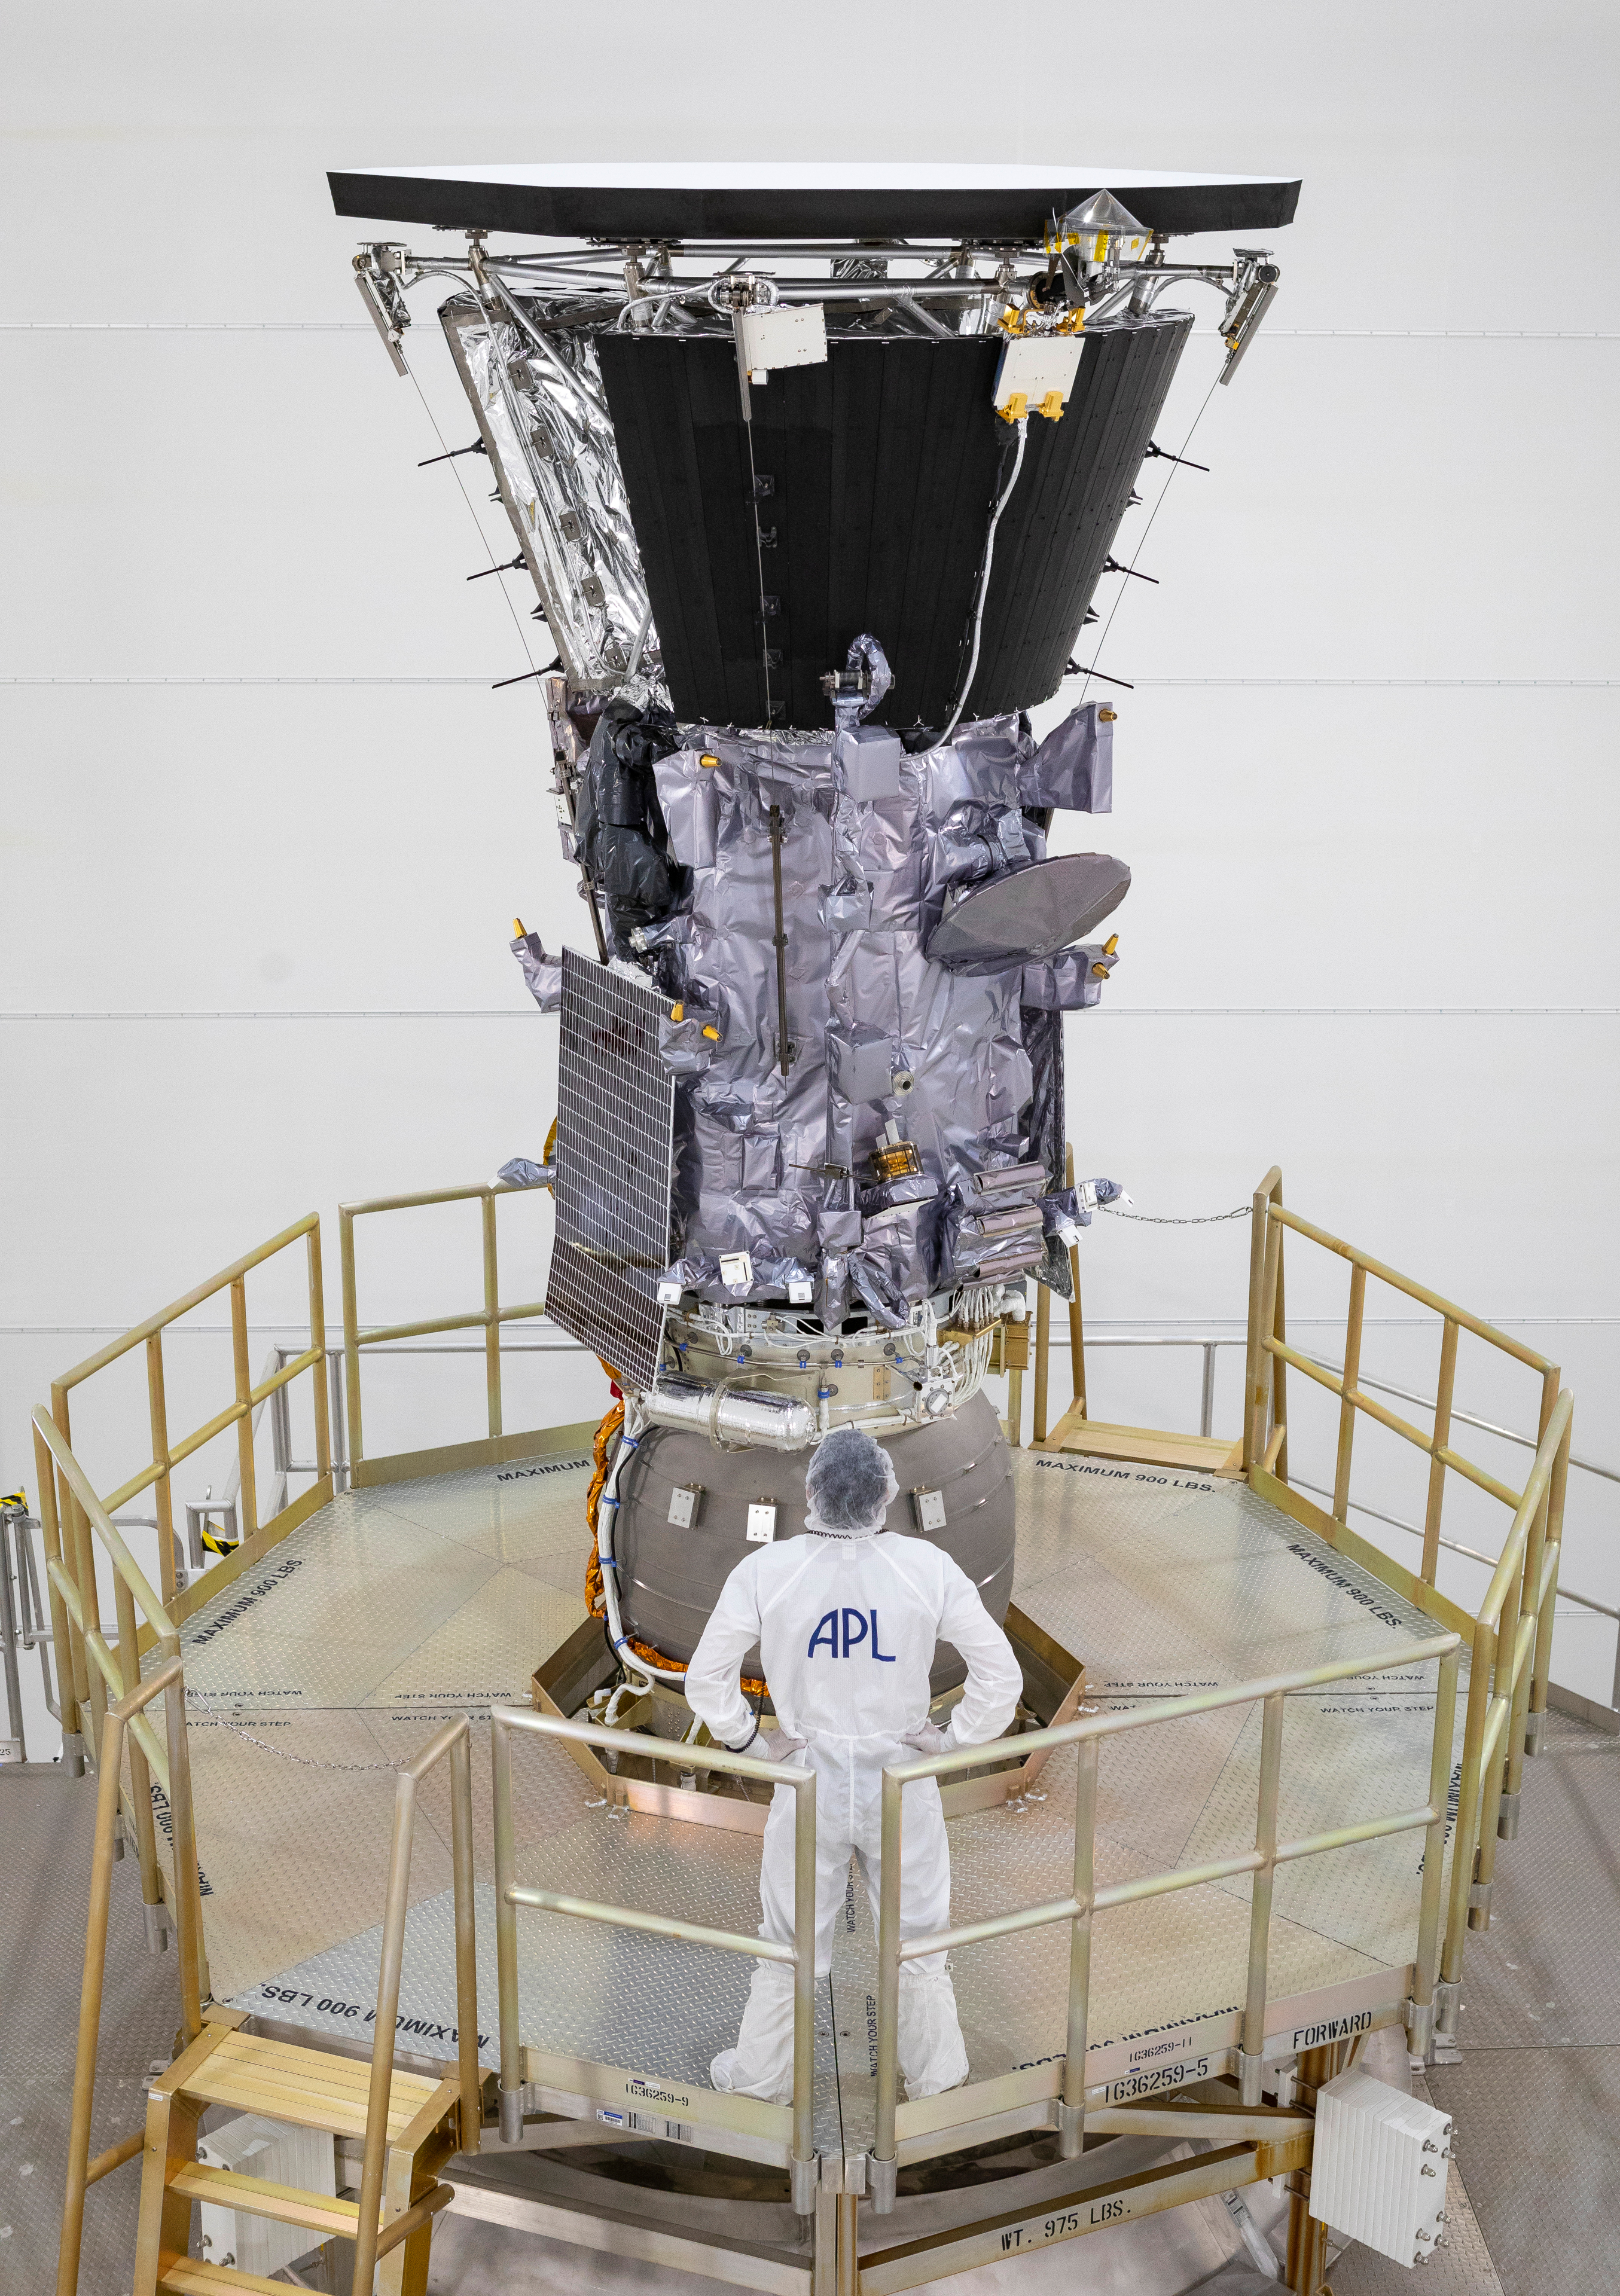 NASA’s Parker Solar Probe is shown here mated to its third stage rocket motor on July 16, 2018, at Astrotech Space Operations in Titusville, Florida. In addition to using the largest operational launch vehicle, the Delta IV Heavy, Parker Solar Probe will use a third stage rocket to gain the speed needed to reach the Sun, which takes 55 times more energy than reaching Mars. 